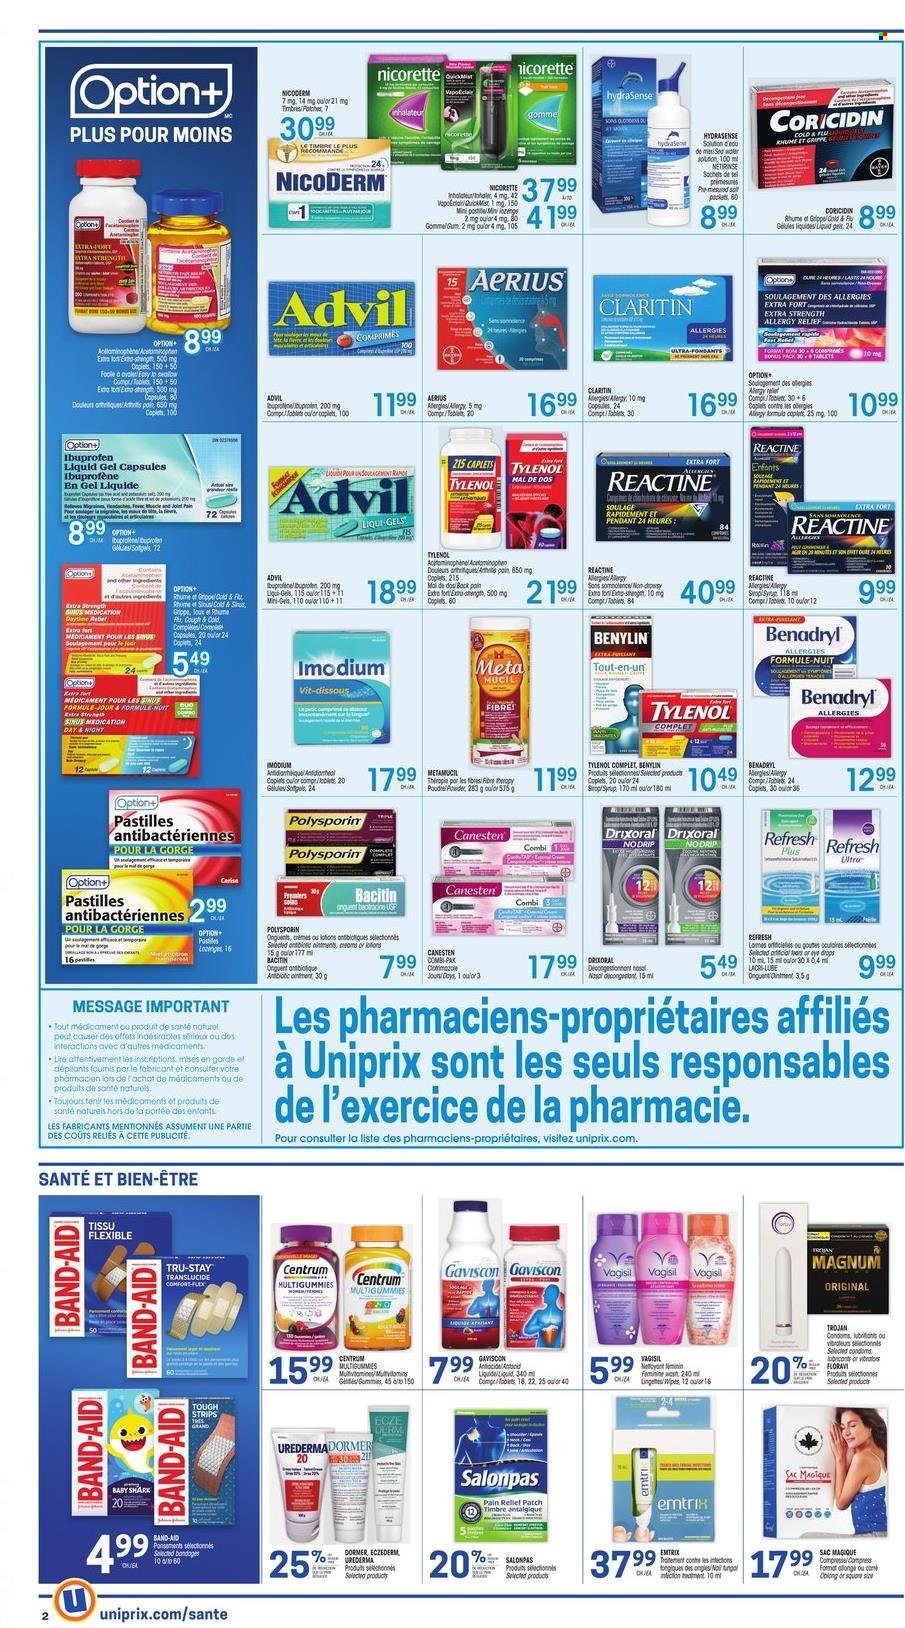 thumbnail - Uniprix Flyer - May 19, 2022 - May 25, 2022 - Sales products - pastilles, Rana, syrup, L'Or, ointment, Coricidin, NicoDerm, Nicorette, Tylenol, Ibuprofen, Advil Rapid, Gaviscon, Centrum, Metamucil, Benylin, allergy relief, band-aid, Imodium. Page 3.